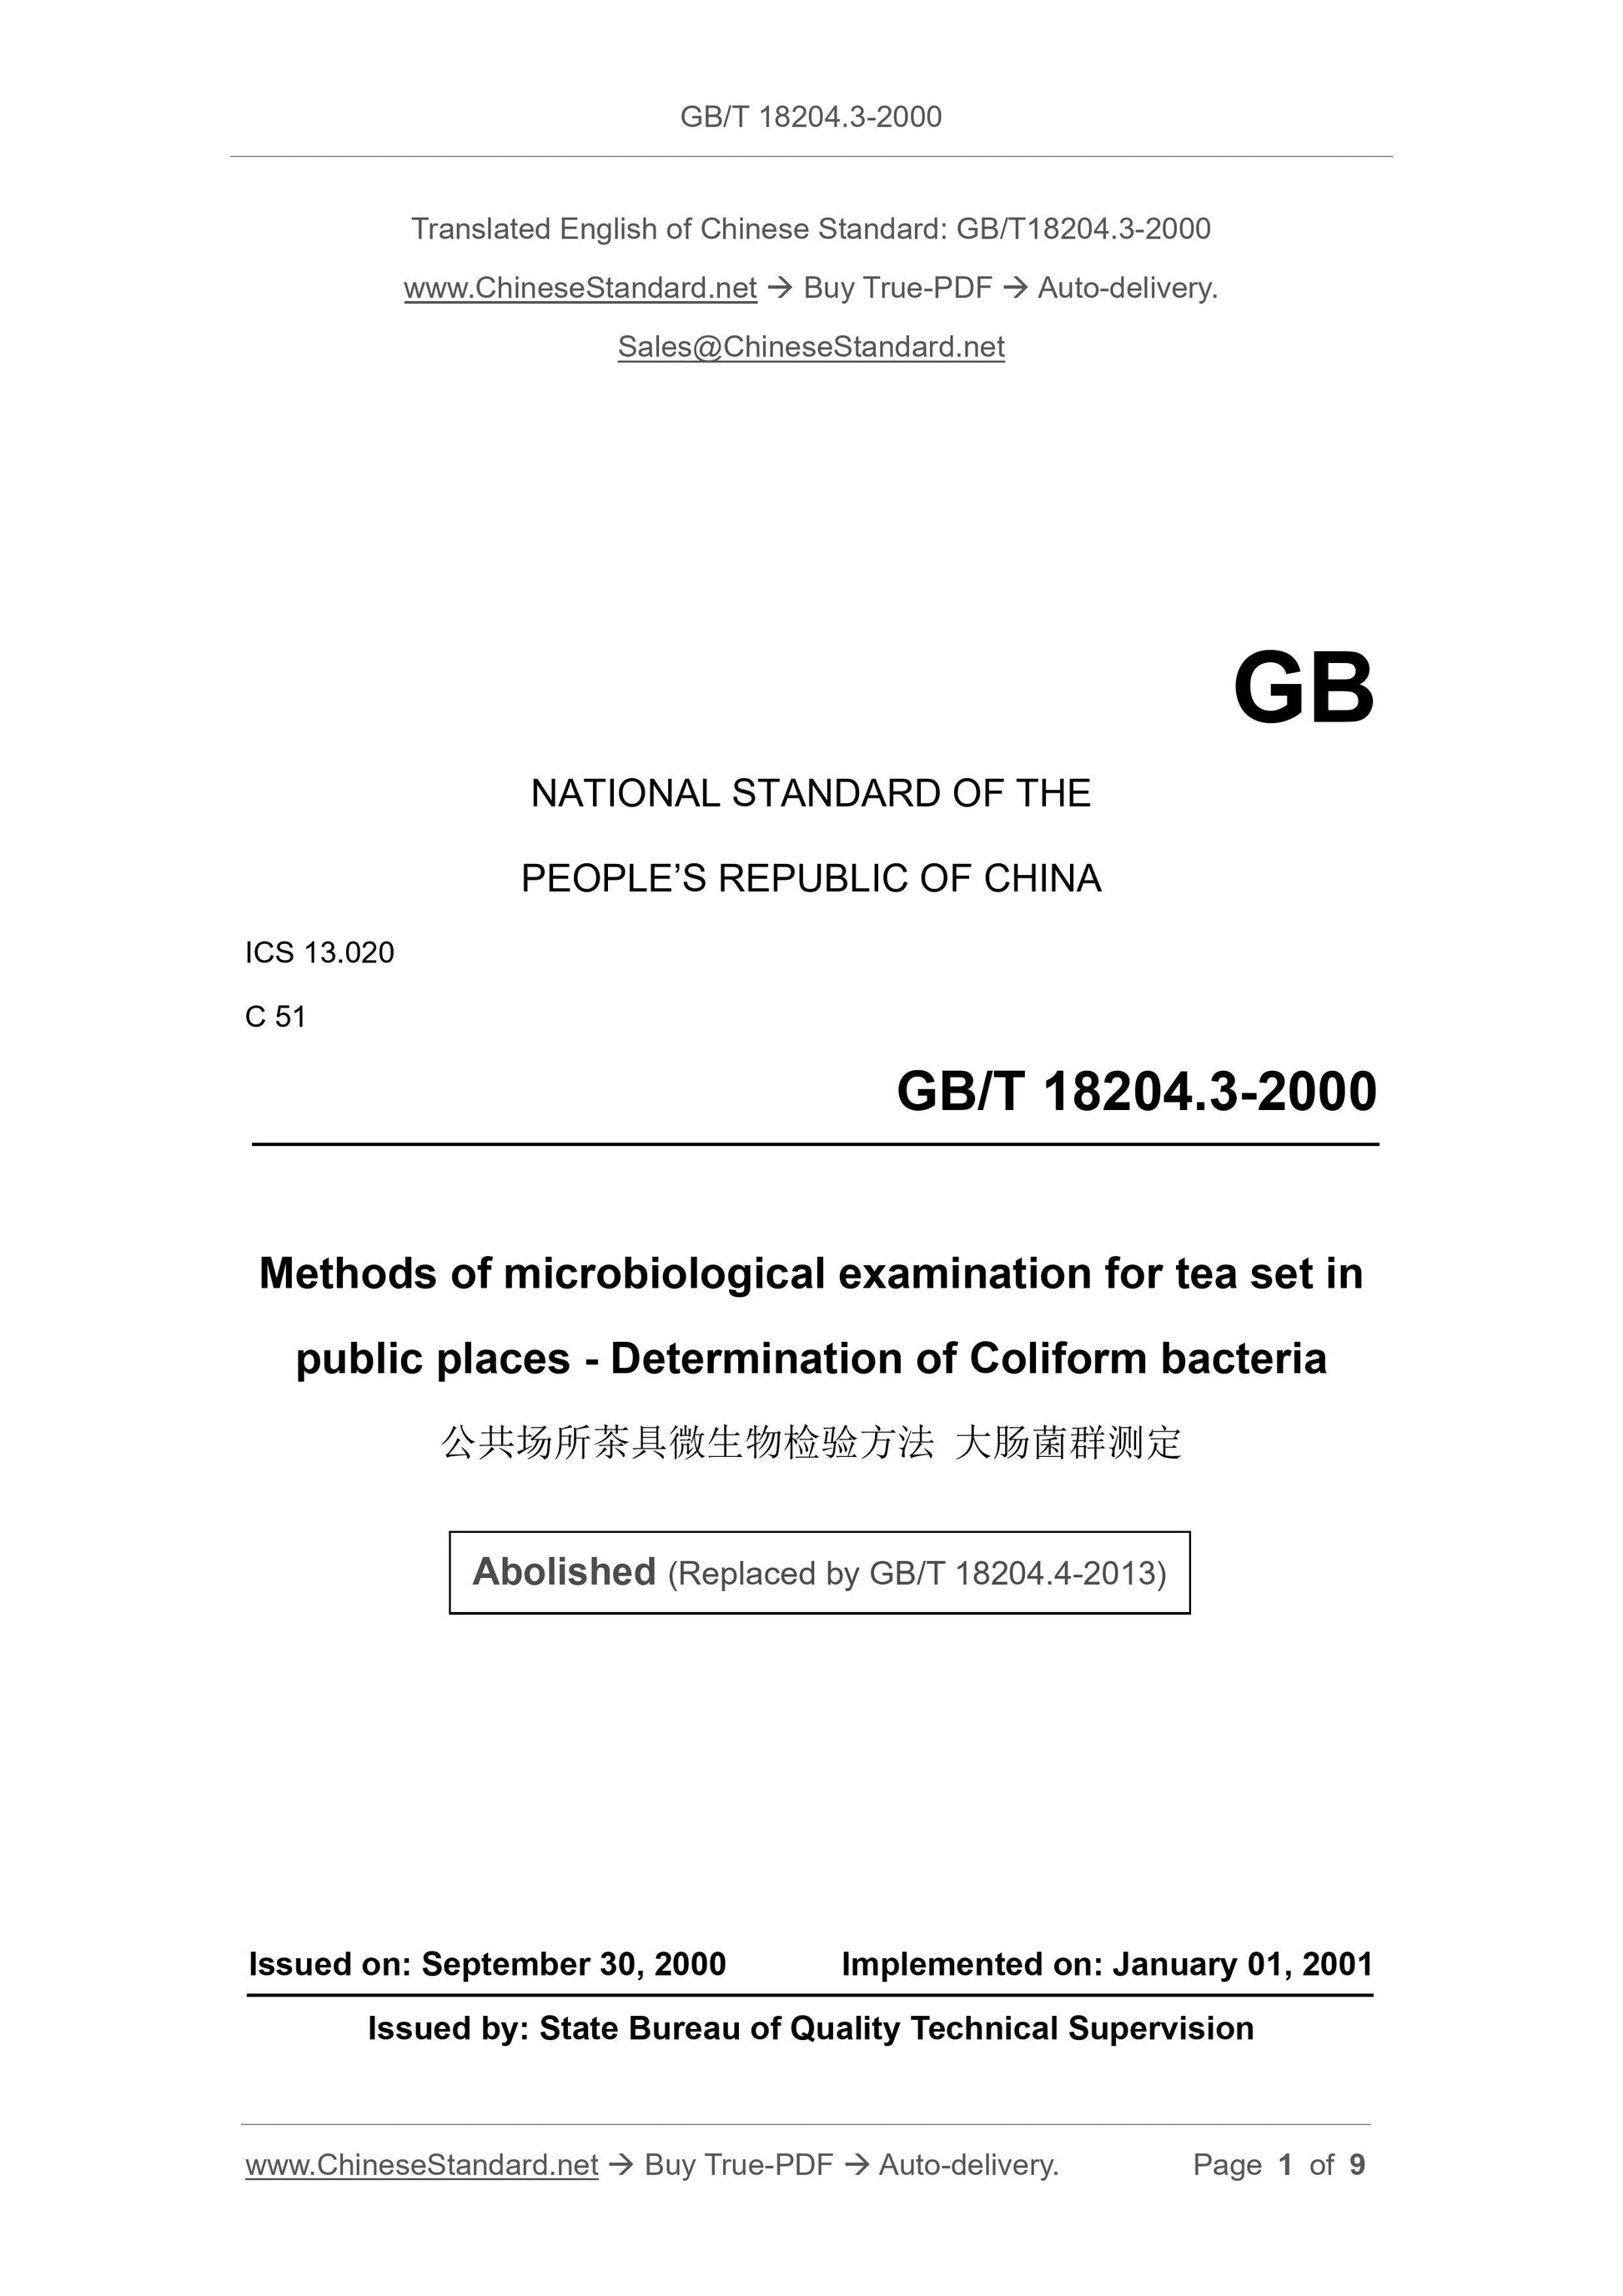 GB/T 18204.3-2000 Page 1